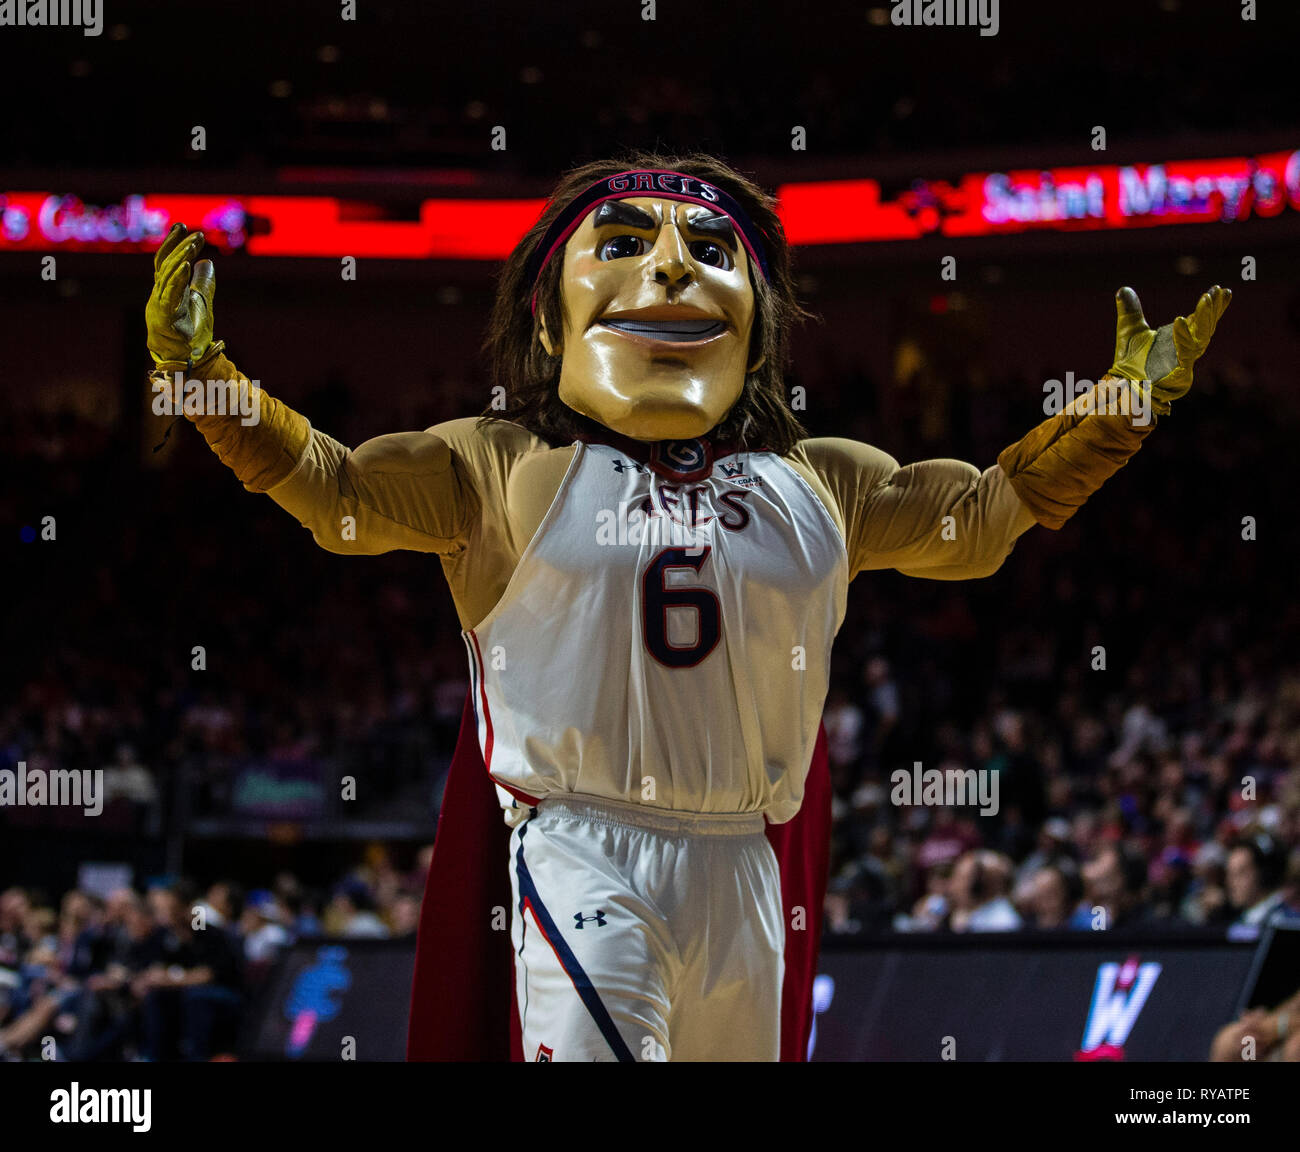 Mar 12 2019 Las Vegas, NV, U.S.A. Saint Mary's Mascot during the NCAA West Coast Conference Men's Basketball Tournament championship between the Gonzaga Bulldogs and the Saint Mary's Gaels 60-47 win at Orleans Arena Las Vegas, NV. Thurman James/CSM Stock Photo